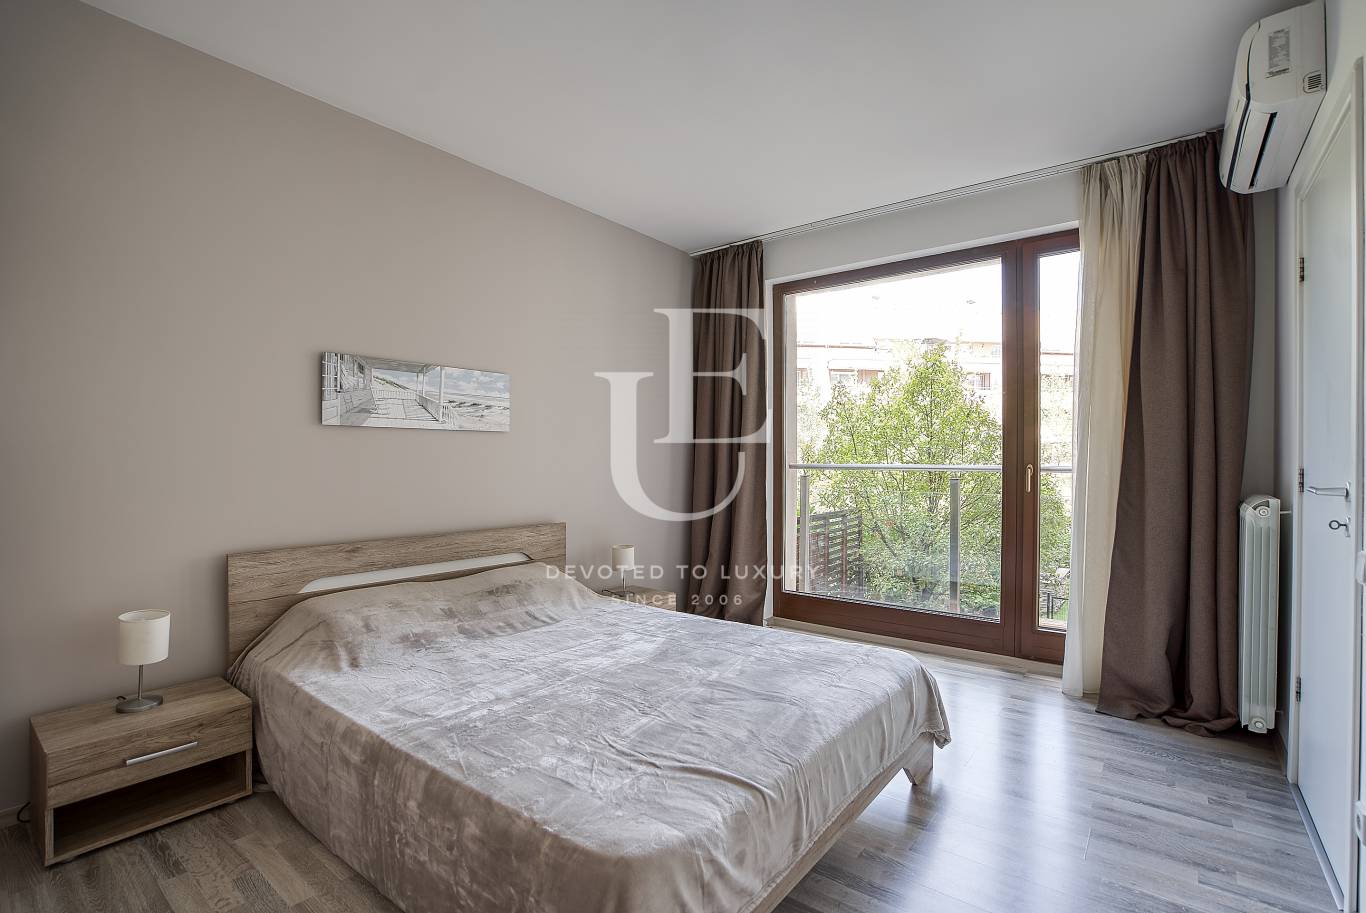 Apartment for rent in Sofia, Manastirski livadi - East with listing ID: N18057 - image 3